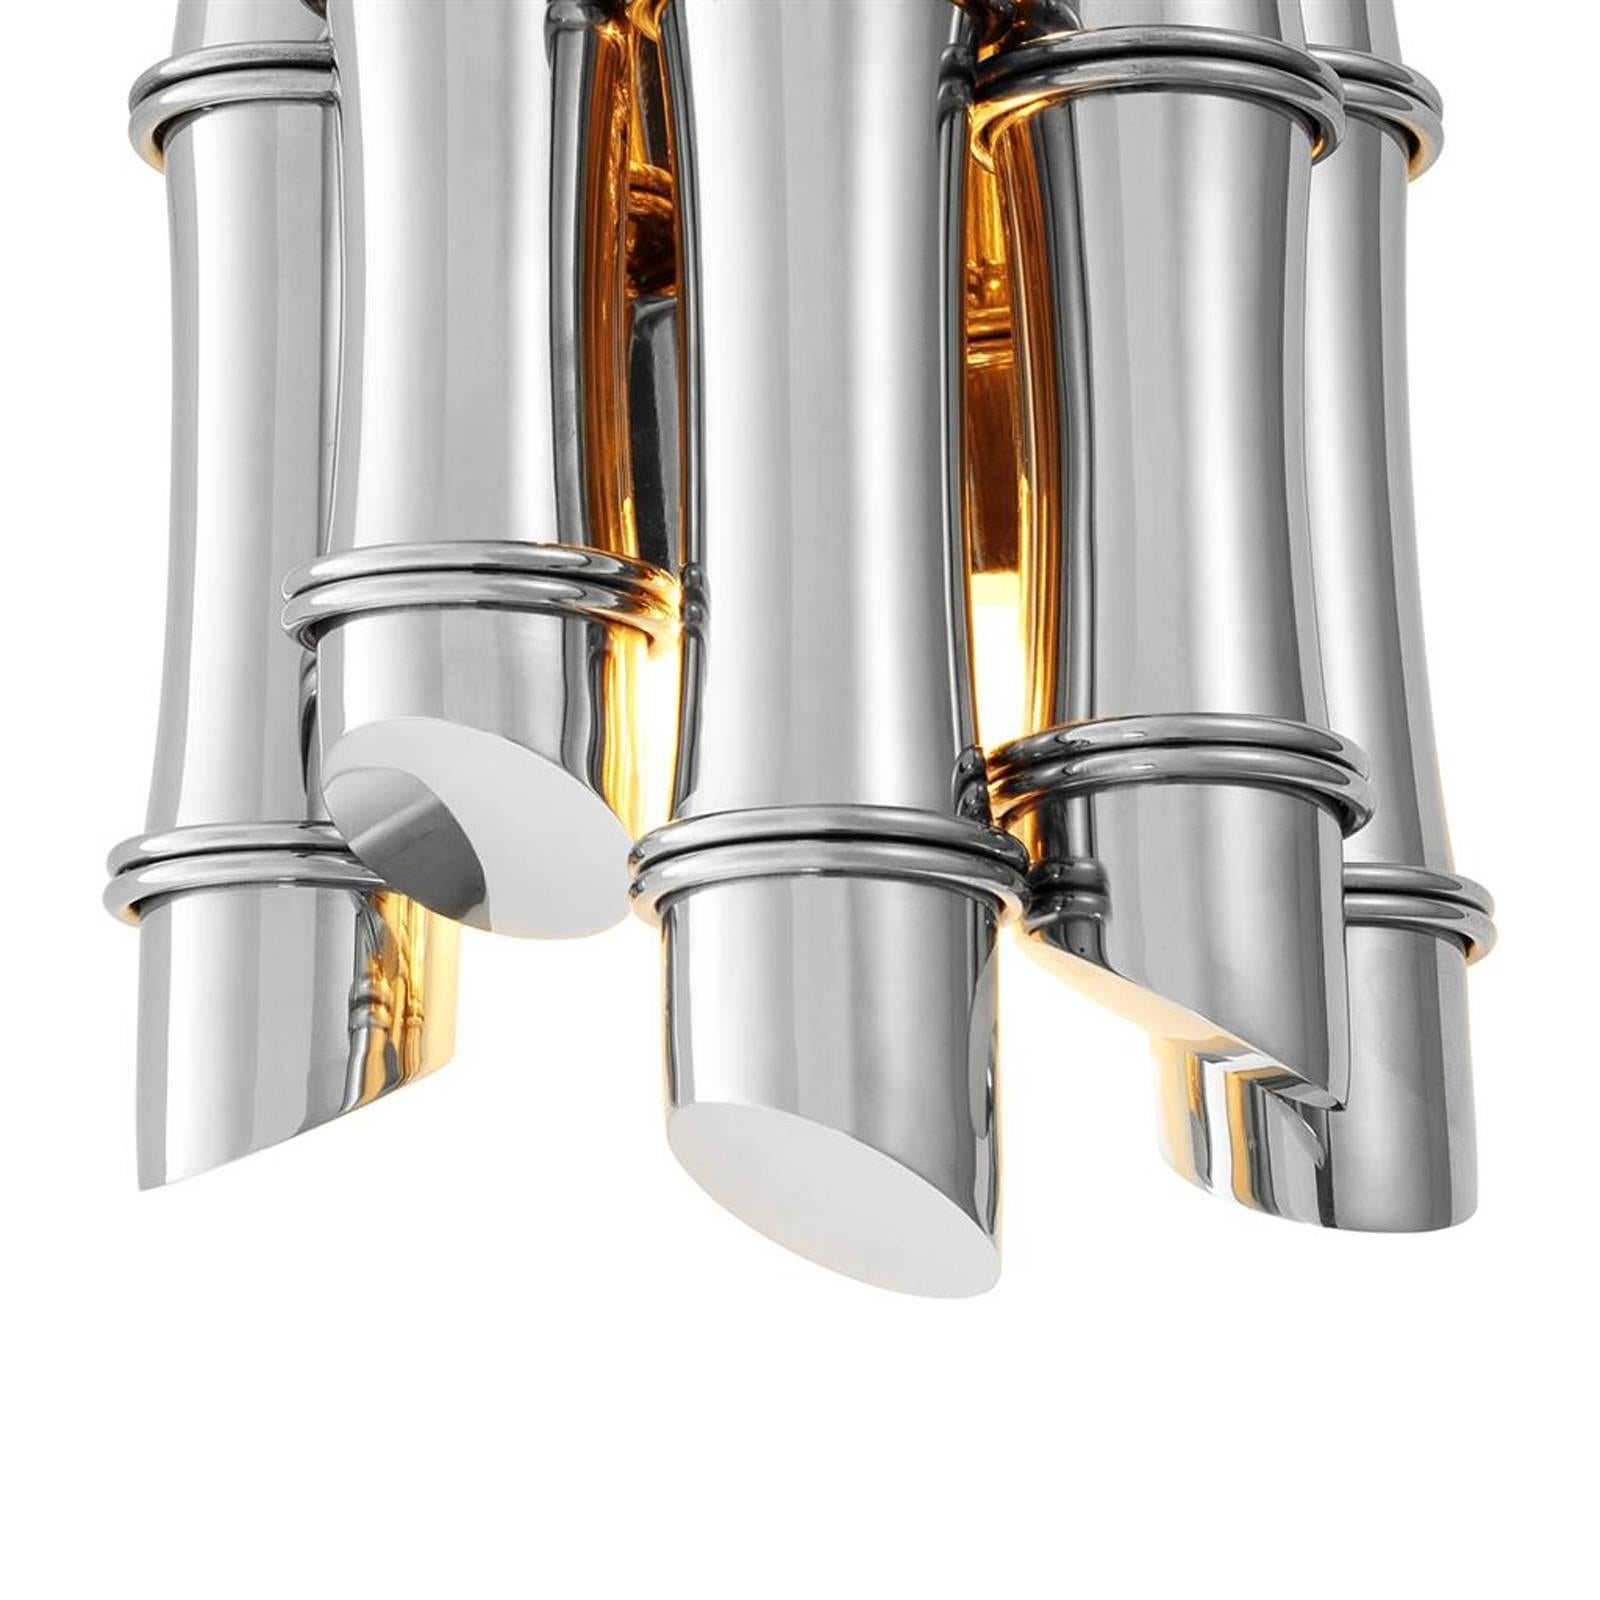 Spa Wall Light in Vintage Brass or Polished Stainless Steel Finish In Excellent Condition For Sale In Paris, FR